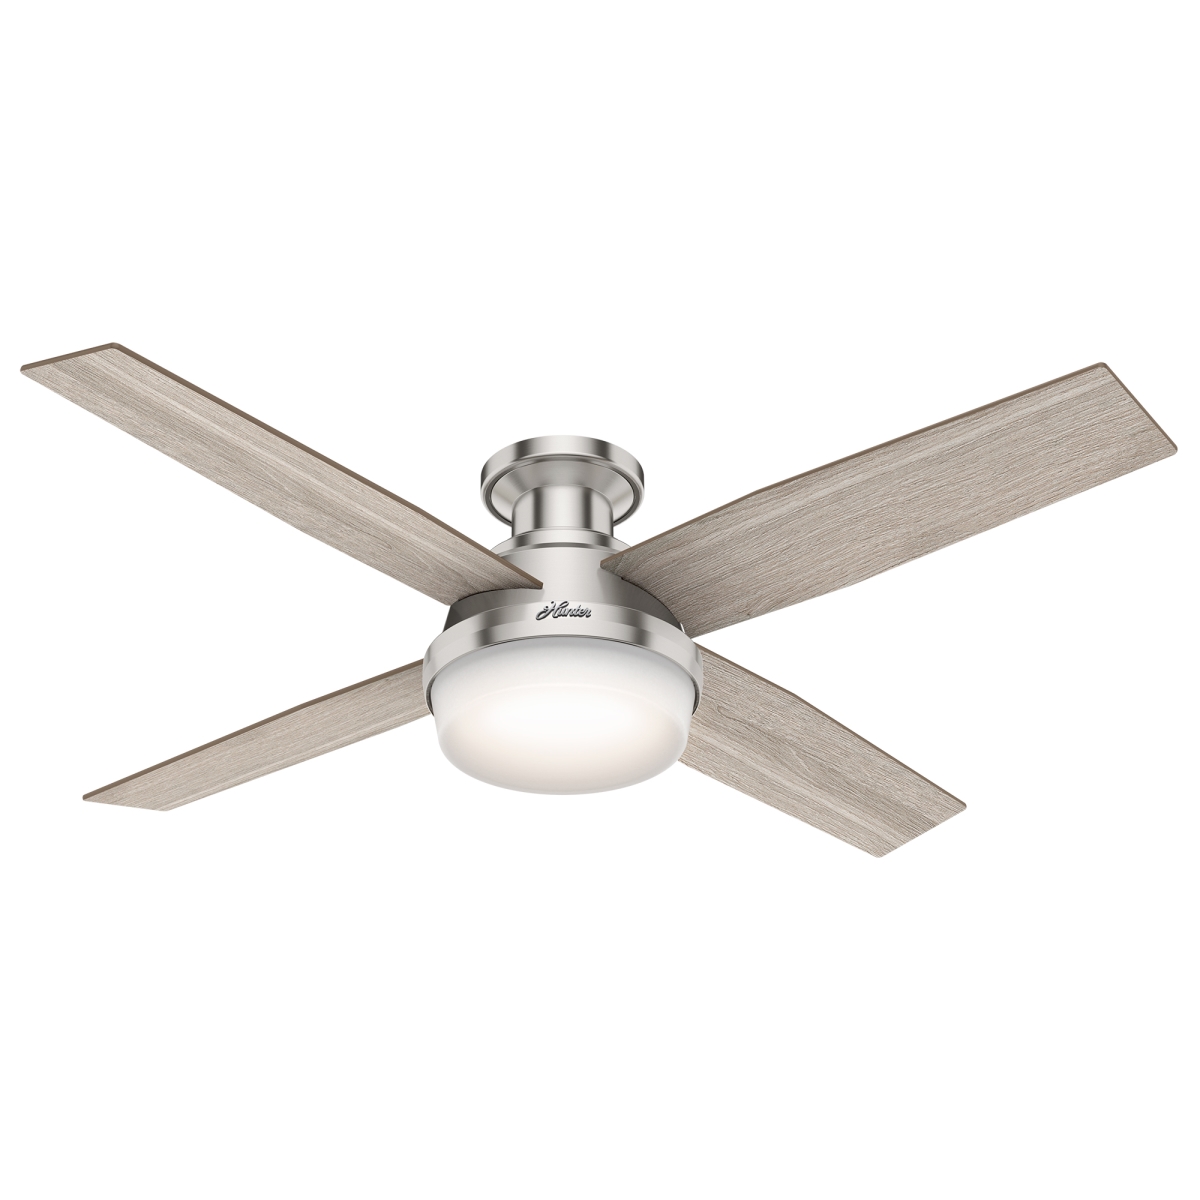 Picture of Hunter 50283 52 in. Dempsey Brushed Nickel Low Profile Ceiling Fan with LED Light Kit & Handheld Remote